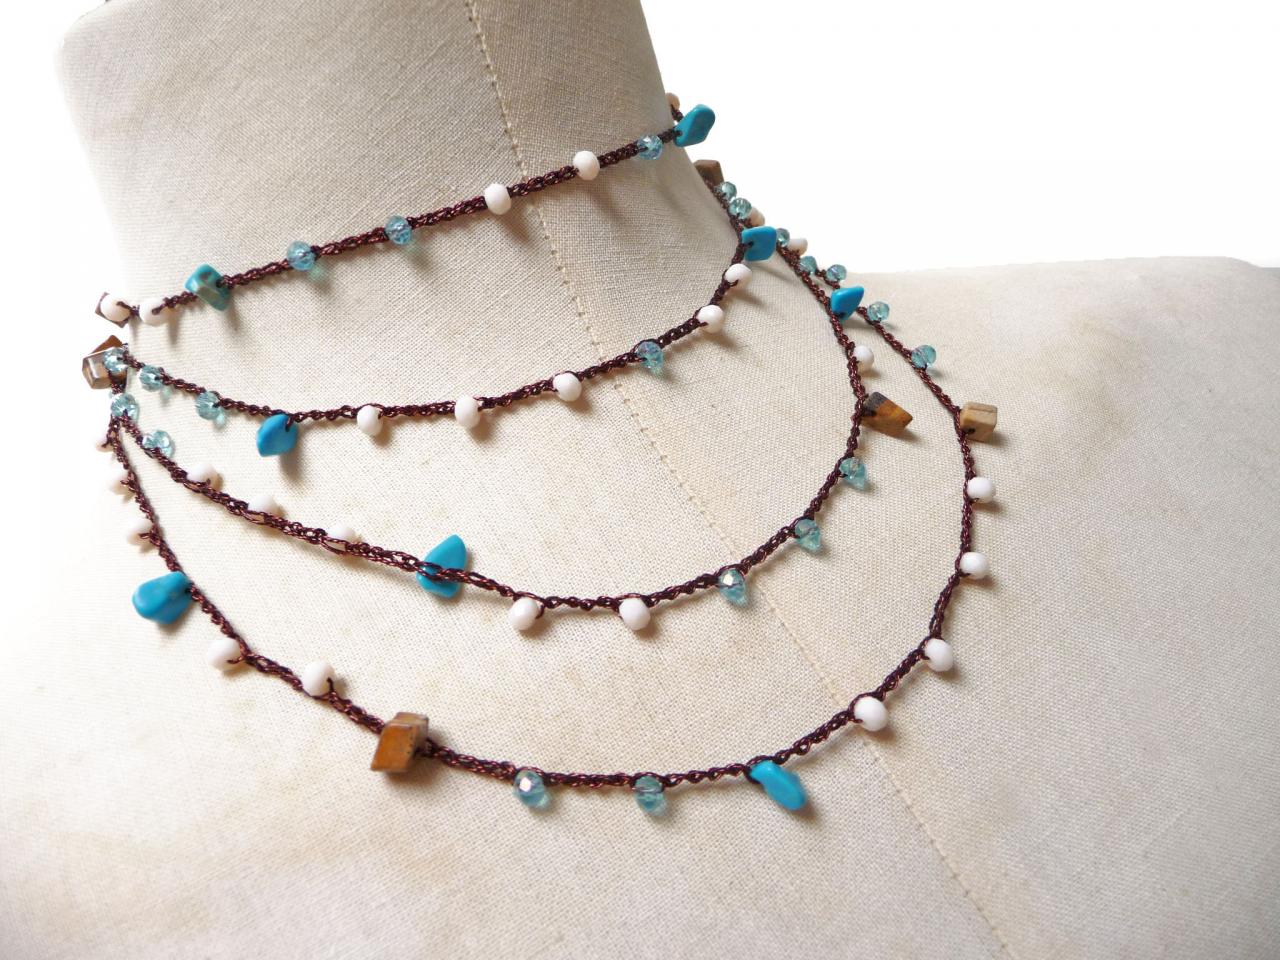 Long Beaded Necklace, Boho Style Multi Wrap Bracelet with Turquoise and Brown Gemstone Chips and Crystals, Rosary Necklace, Crochet Necklace